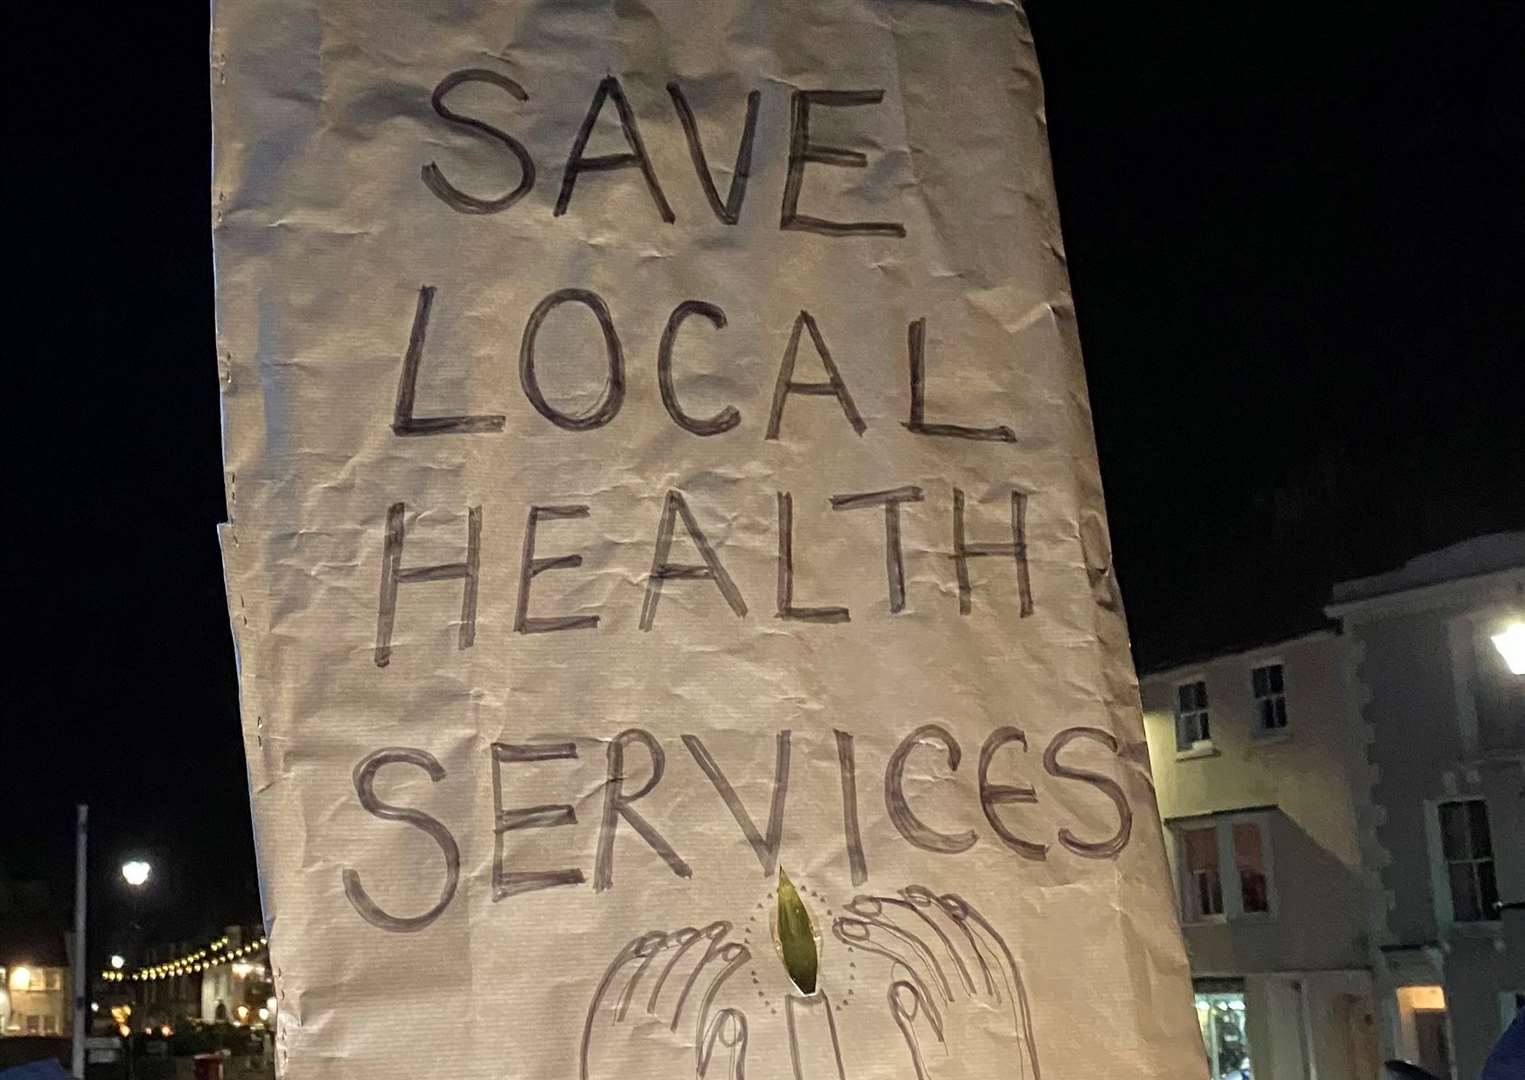 One of the banners at the vigil